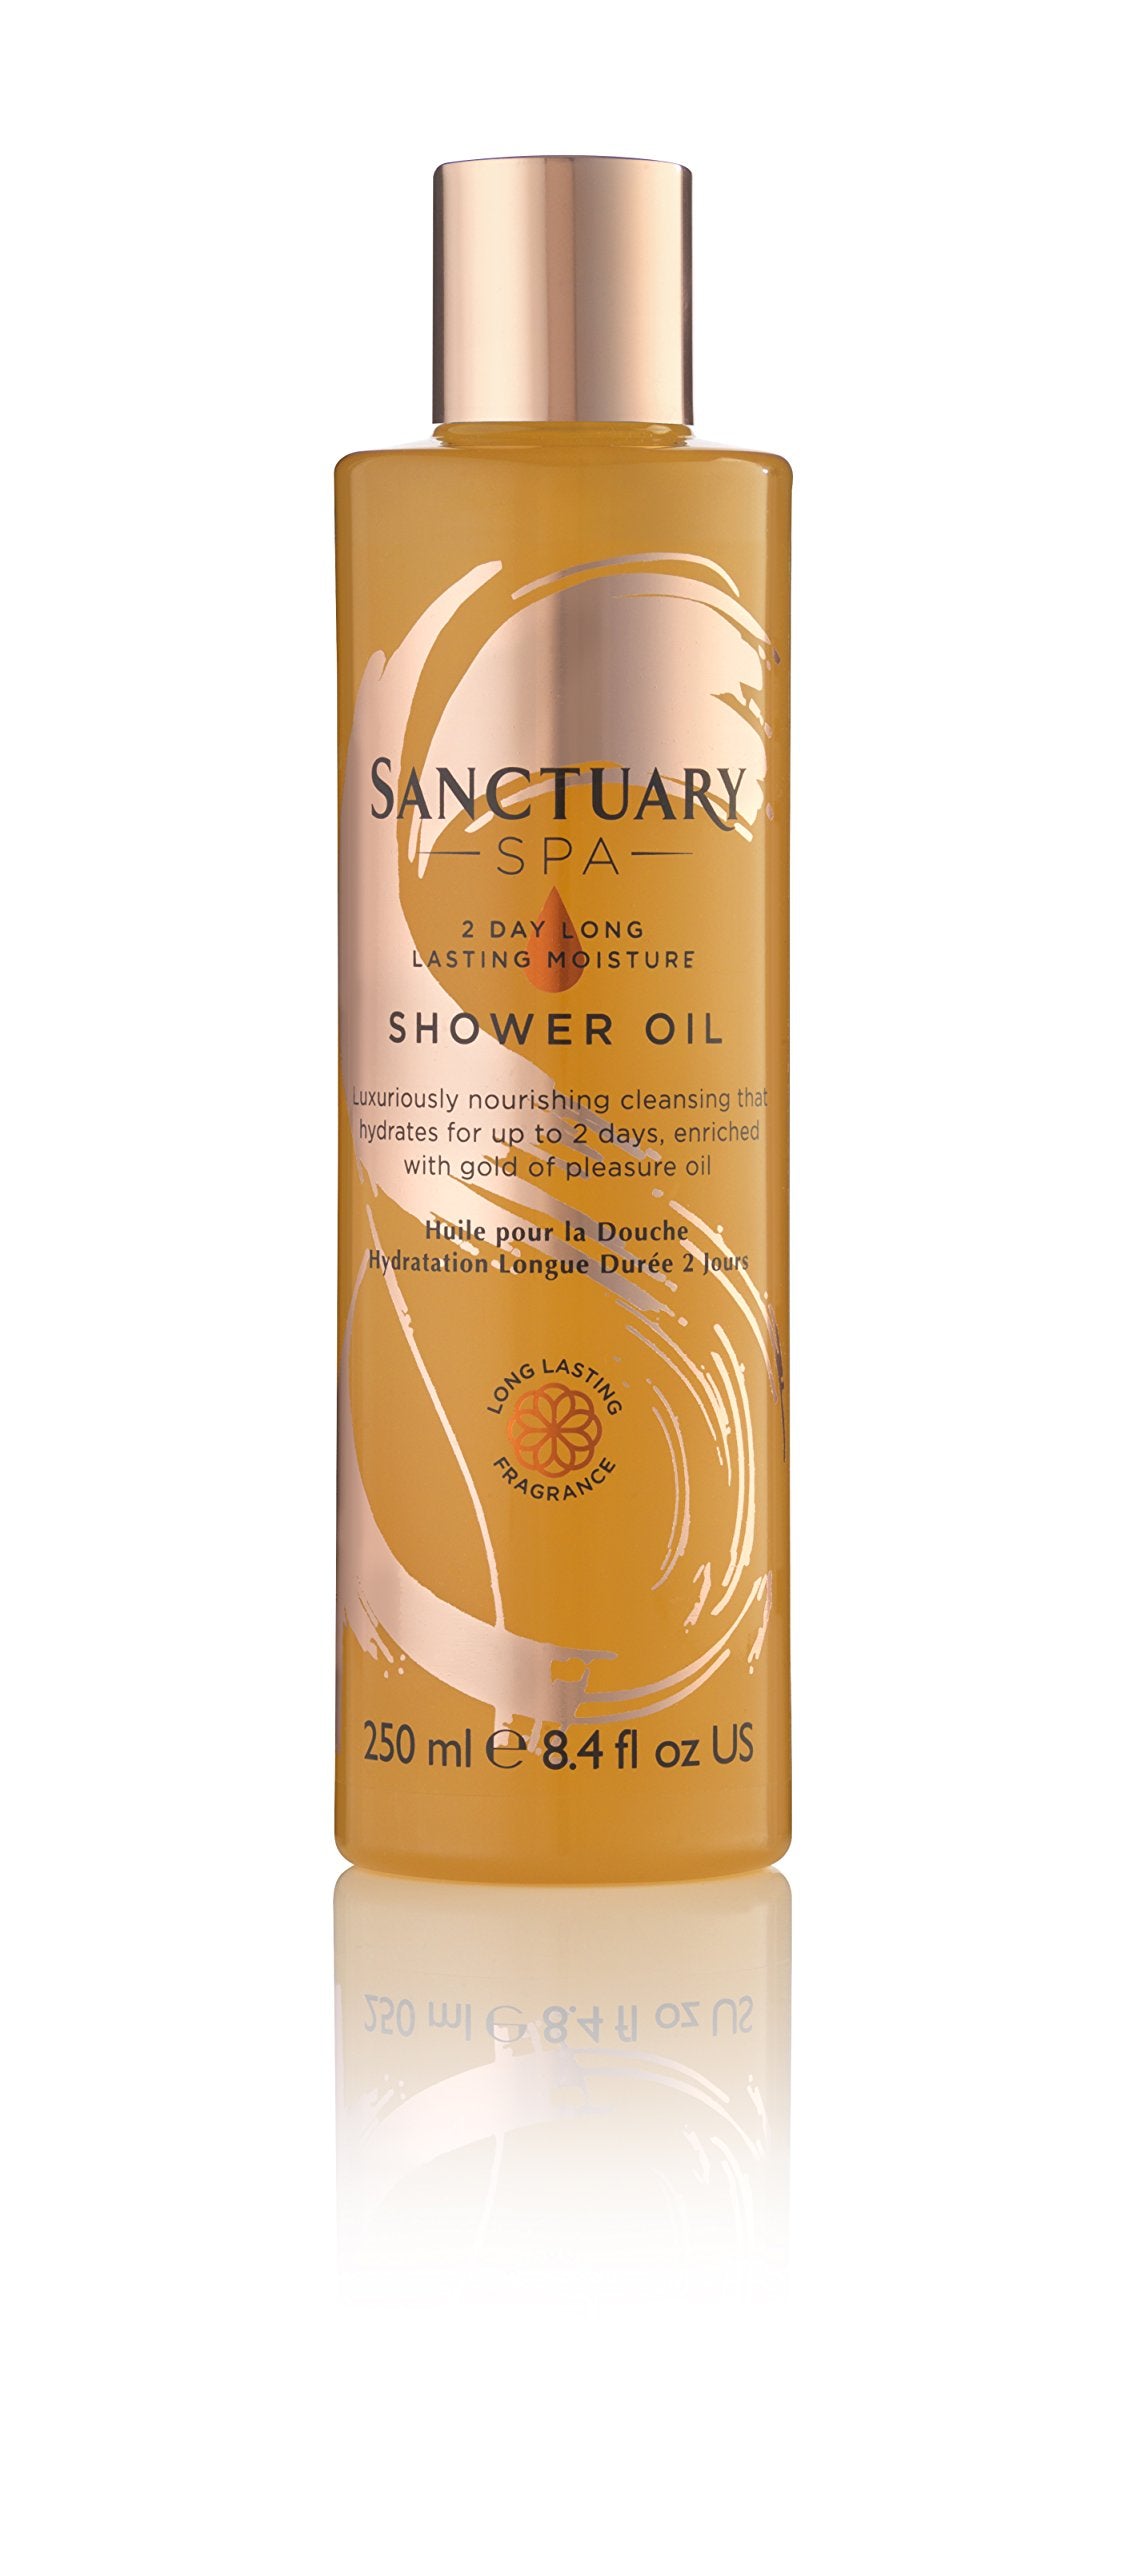 Sanctuary Spa Shower Oil with Natural Oils, Vegan and Cruelty Free, 250 ml